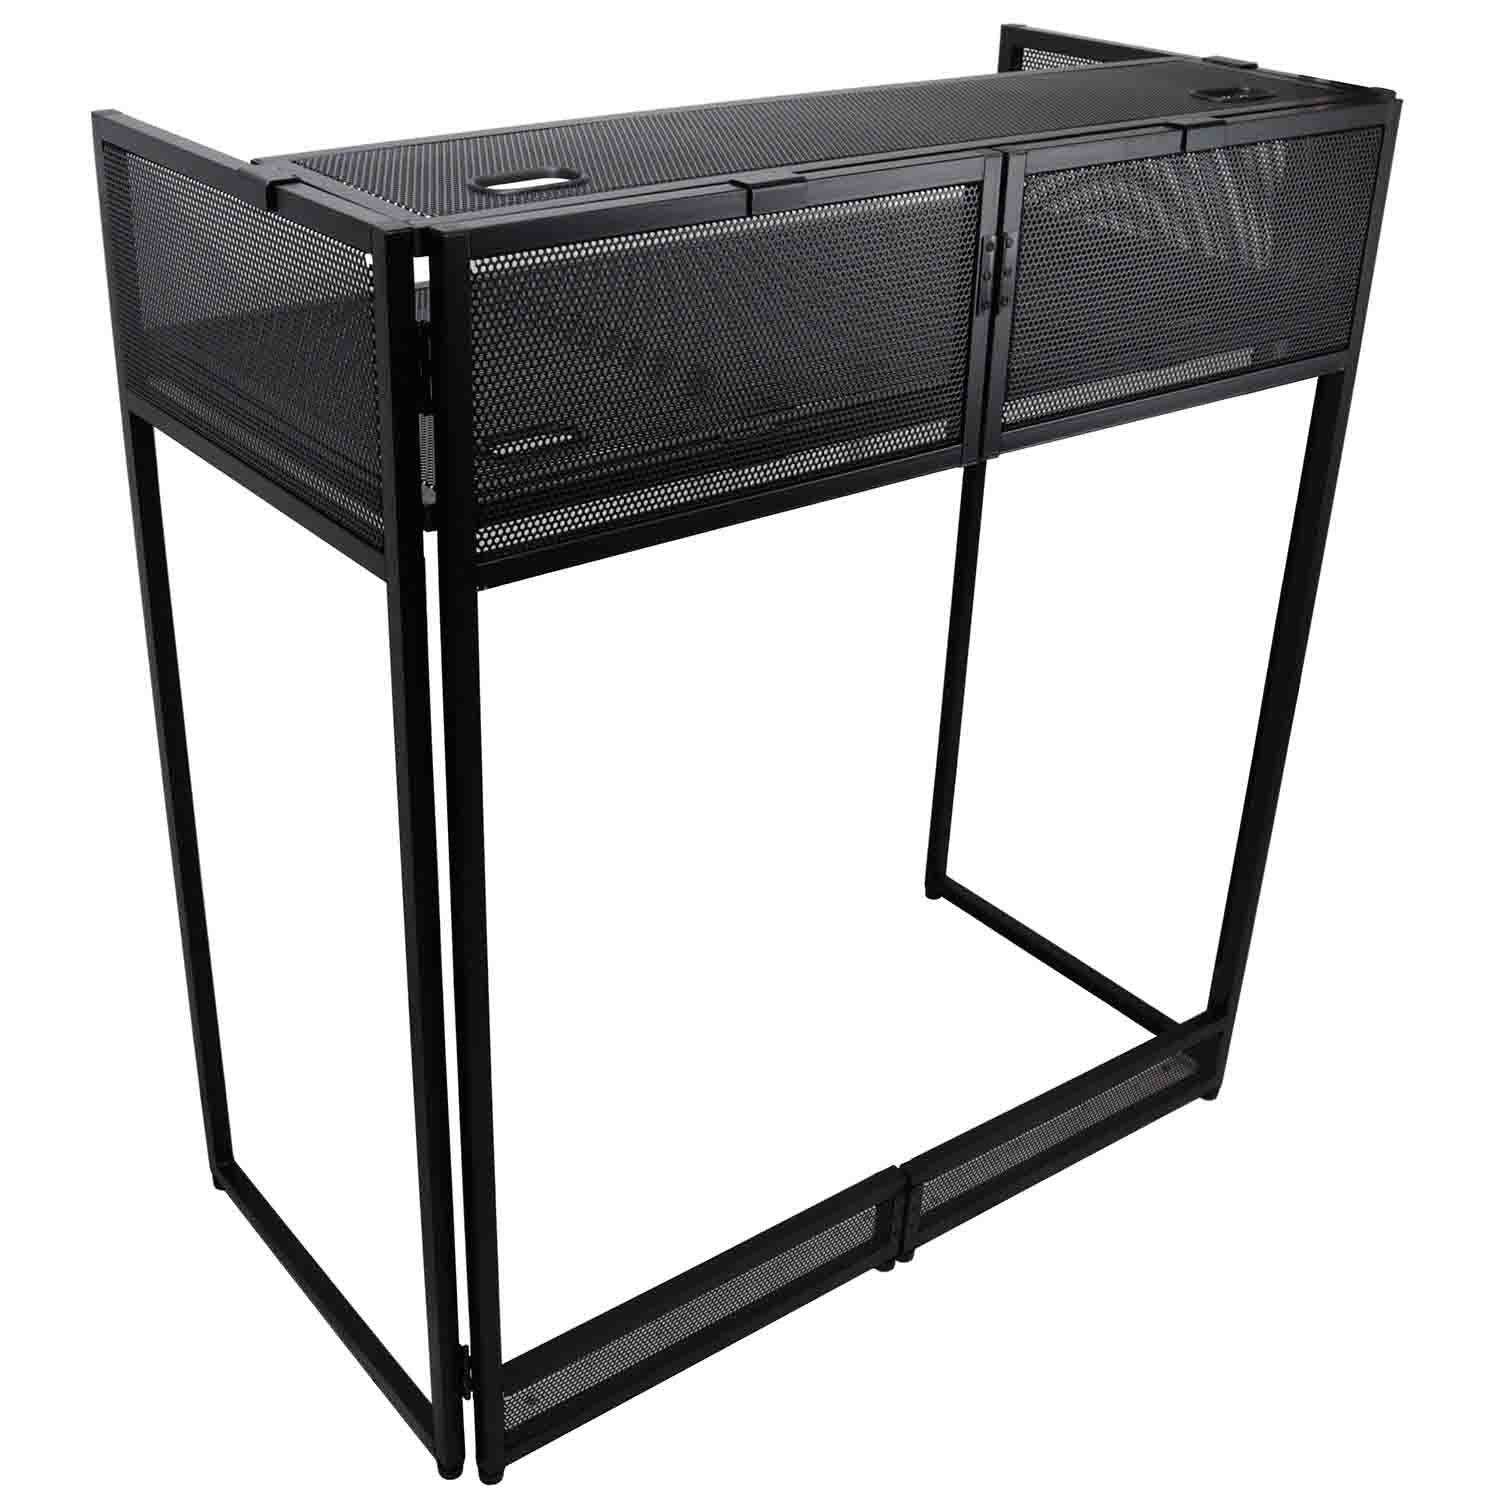 ProX XF-VISTA BL MK2 VISTA DJ Booth Facade Table Station with White/Black Scrim kit and Padded Travel Bag - Hollywood DJ